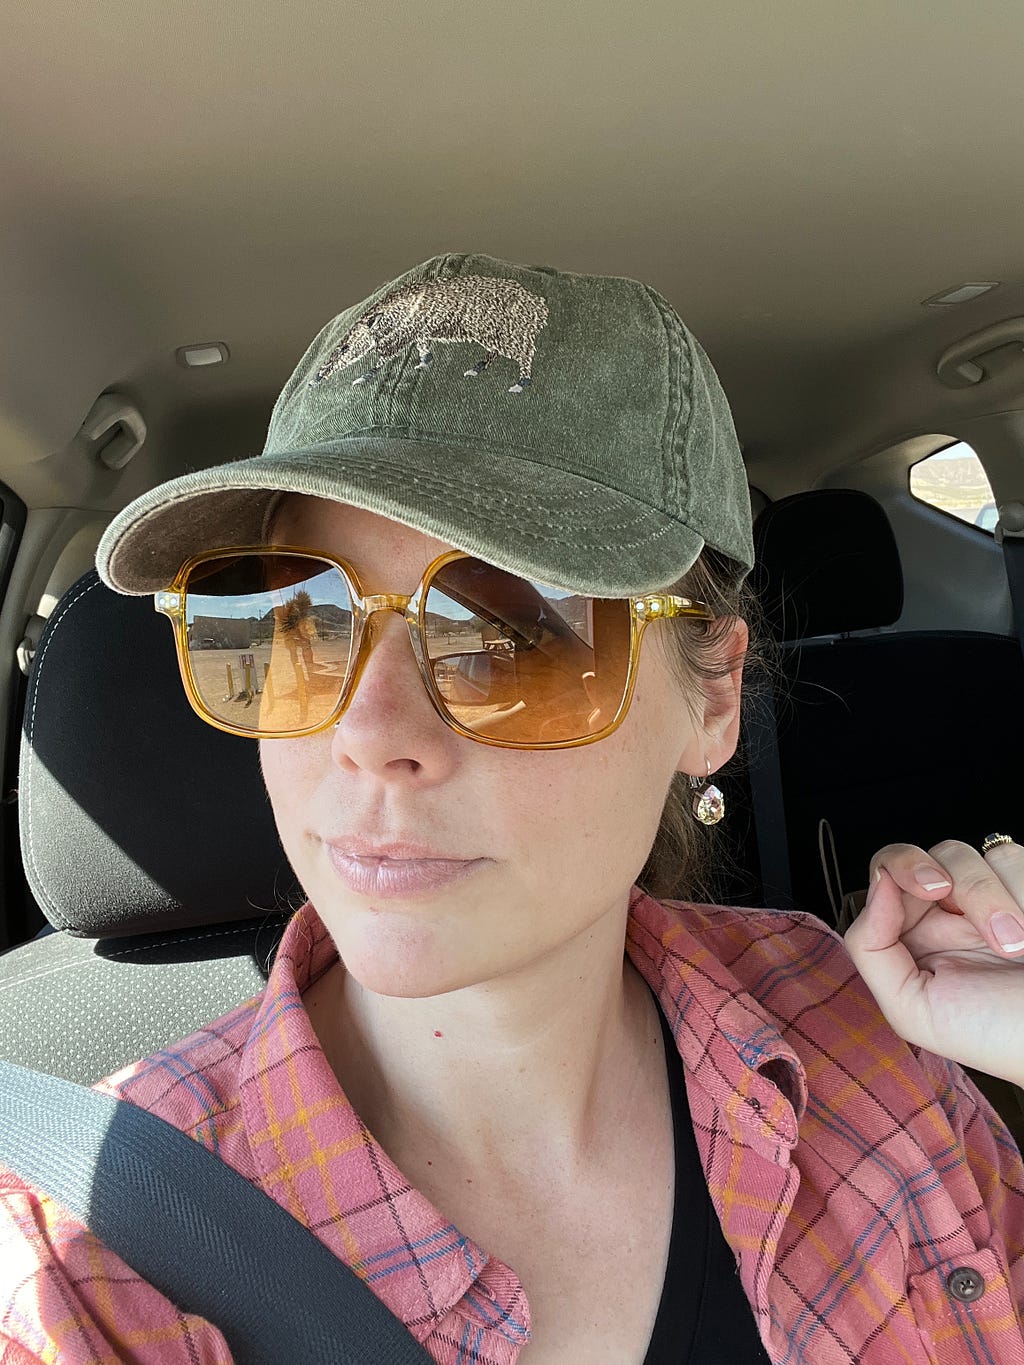 A woman with yellow sunglasses, a pink plaid shirt, and a green hat with a javelina embroidered on it. She has her left hand raised to her shoulder. She is sitting in a car.